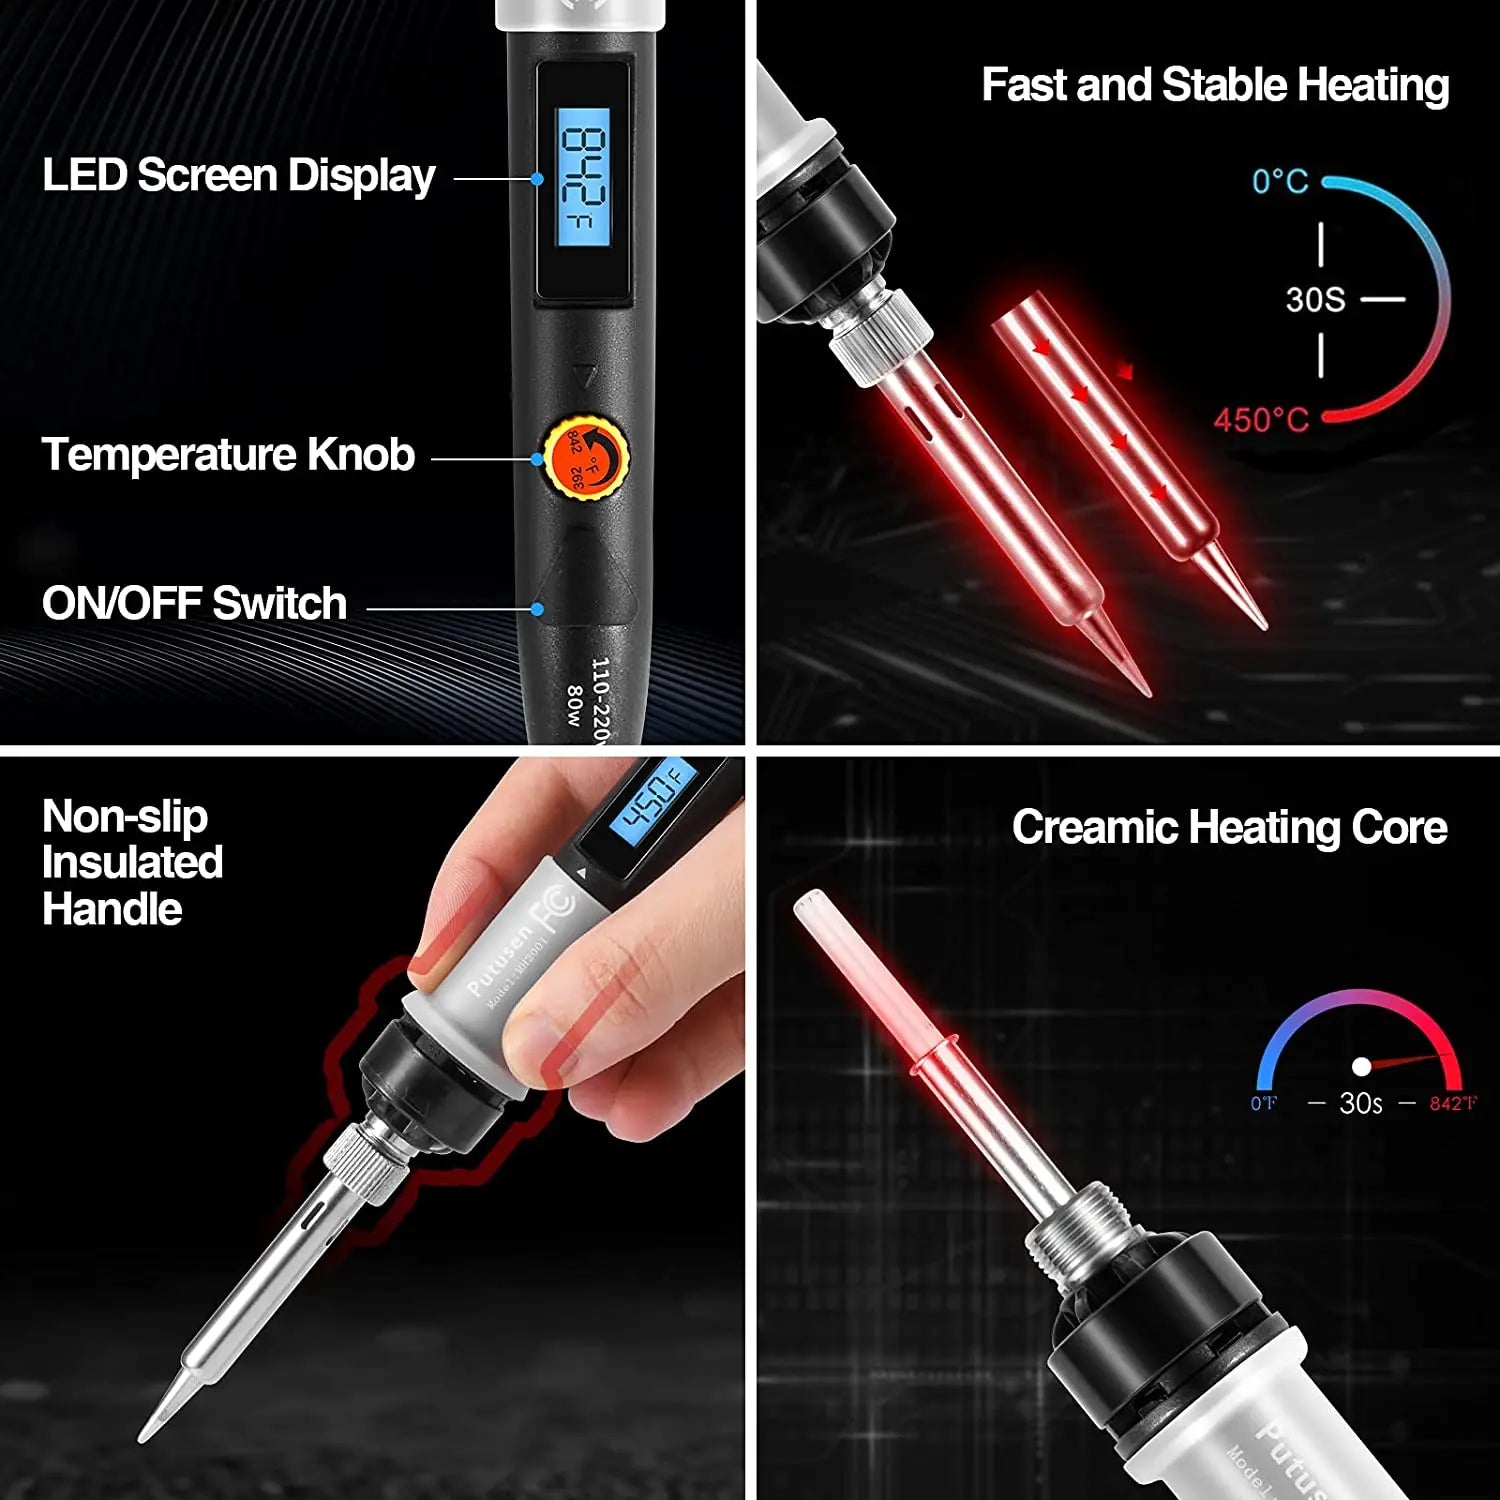 Soldering Iron Kit, 80W LCD Digital Soldering Gun, Portable Solder Iron with Adjustable Temperature Controlled and Fast Heating